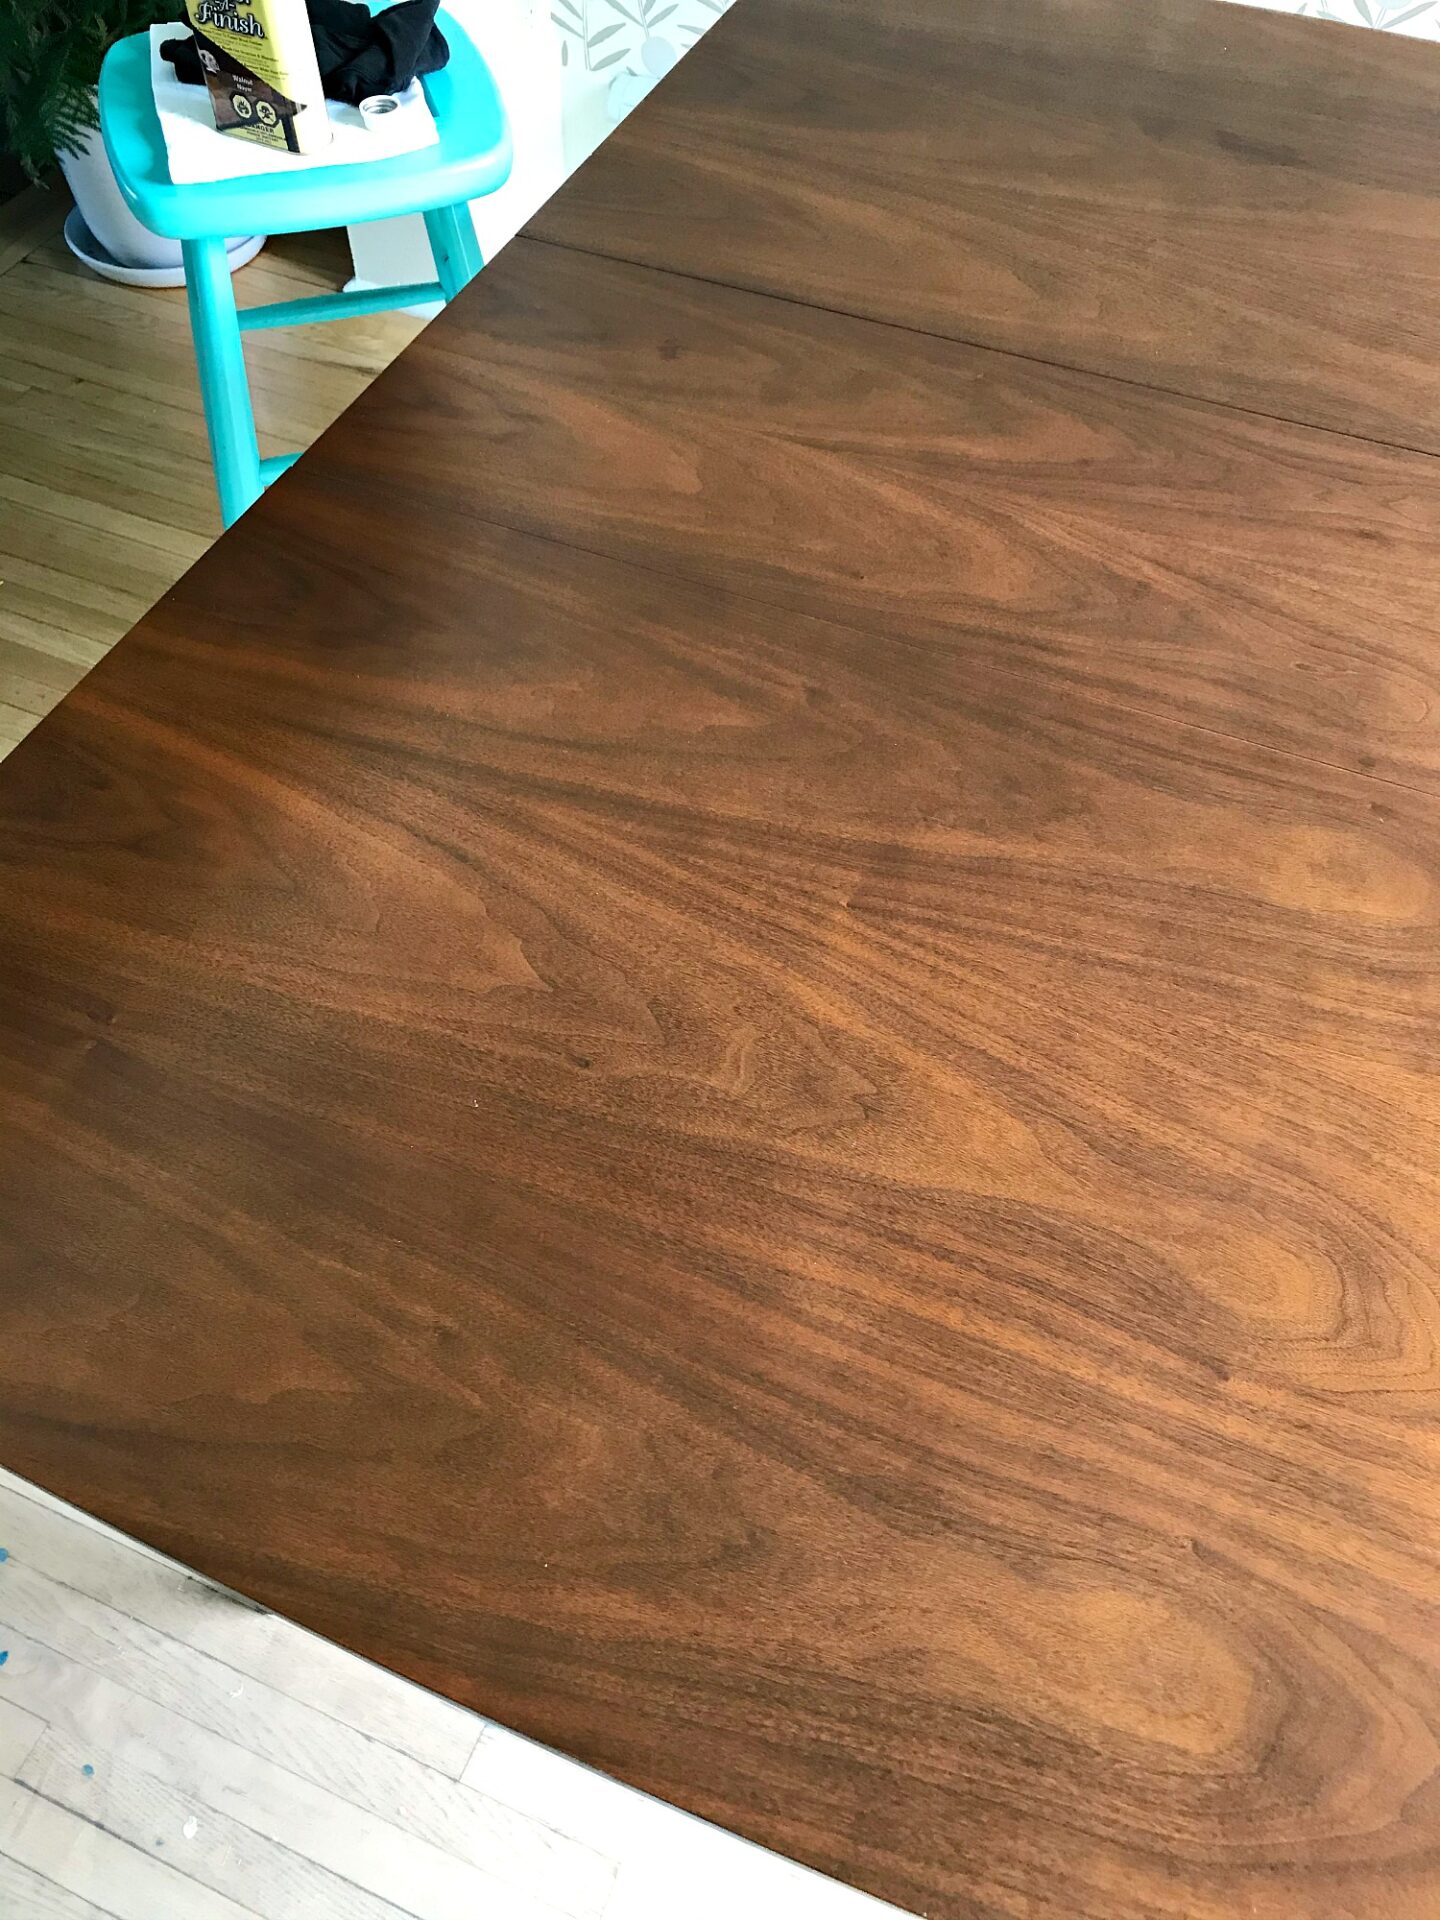 Restore wood furniture without stripping or sanding